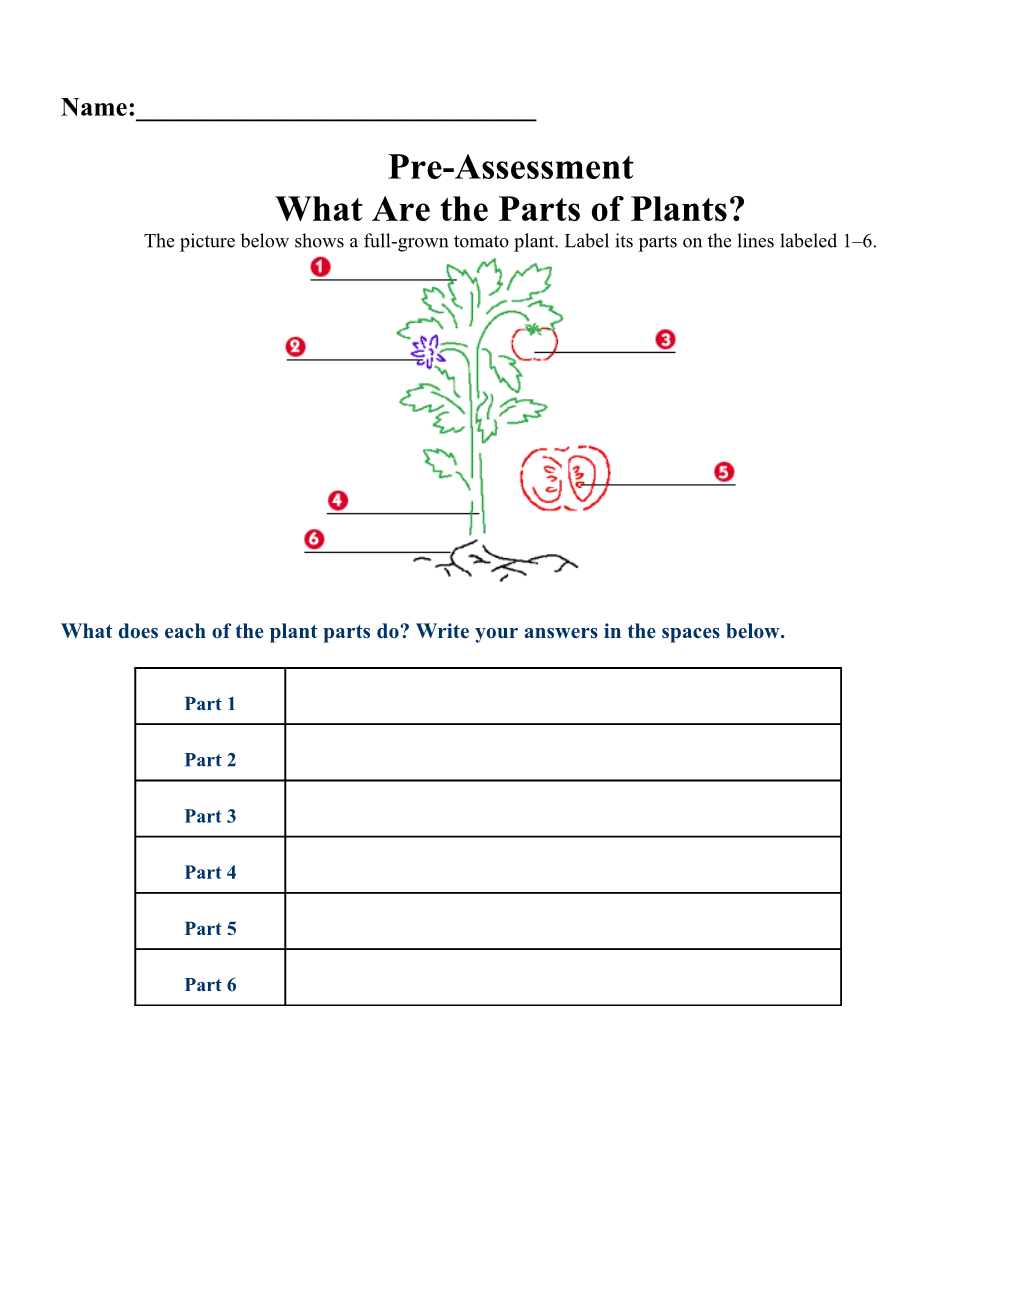 What Are the Parts of Plants?